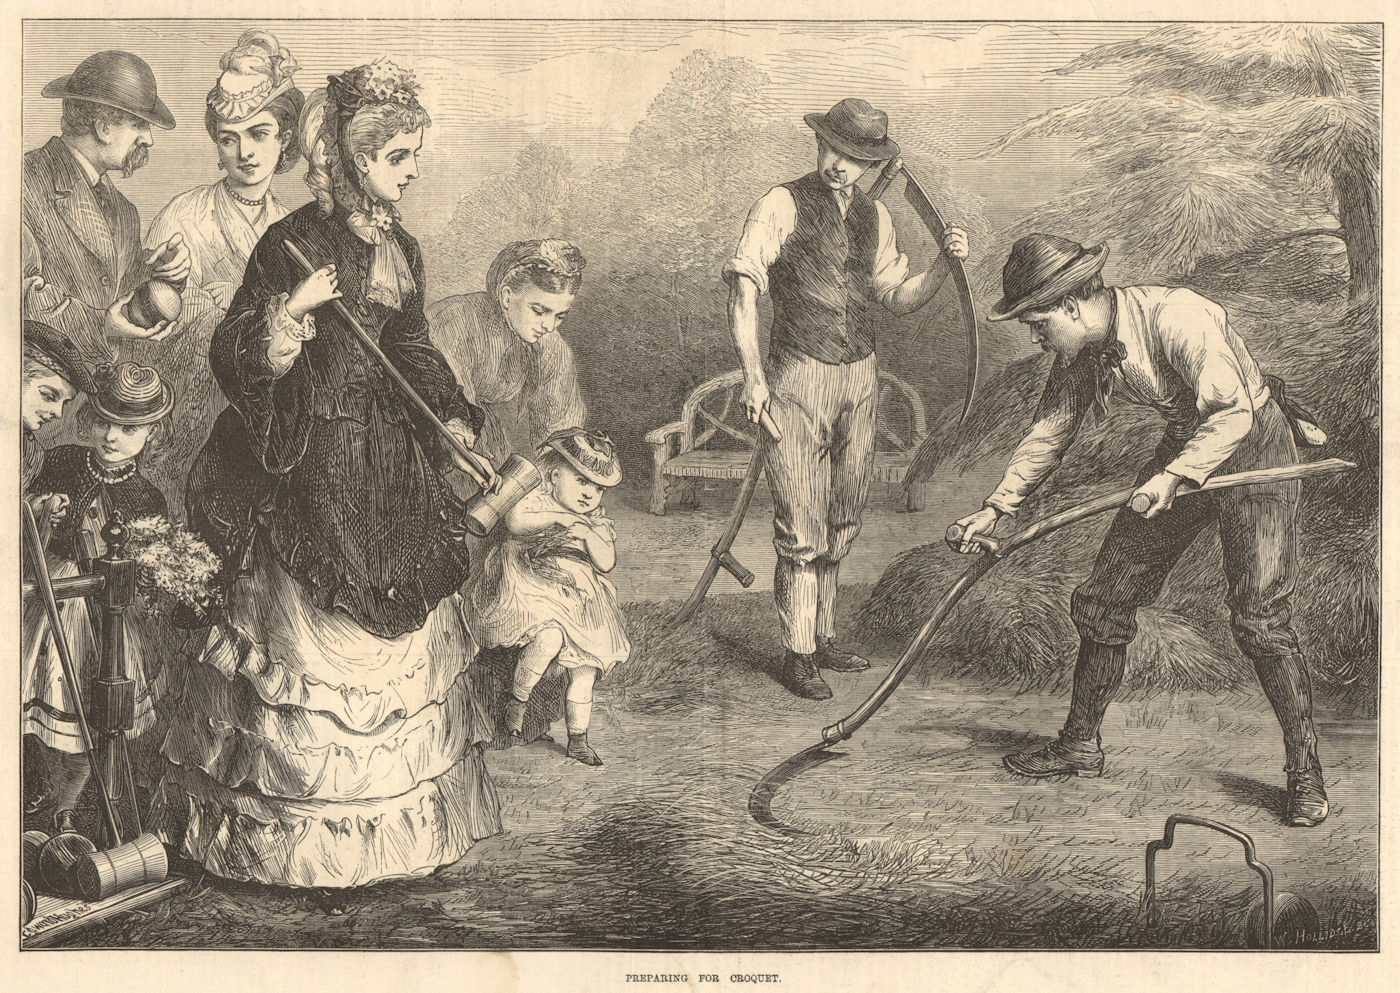 Associate Product Preparing for croquet. Family. Sports. Scything the lawn 1871 antique ILN page